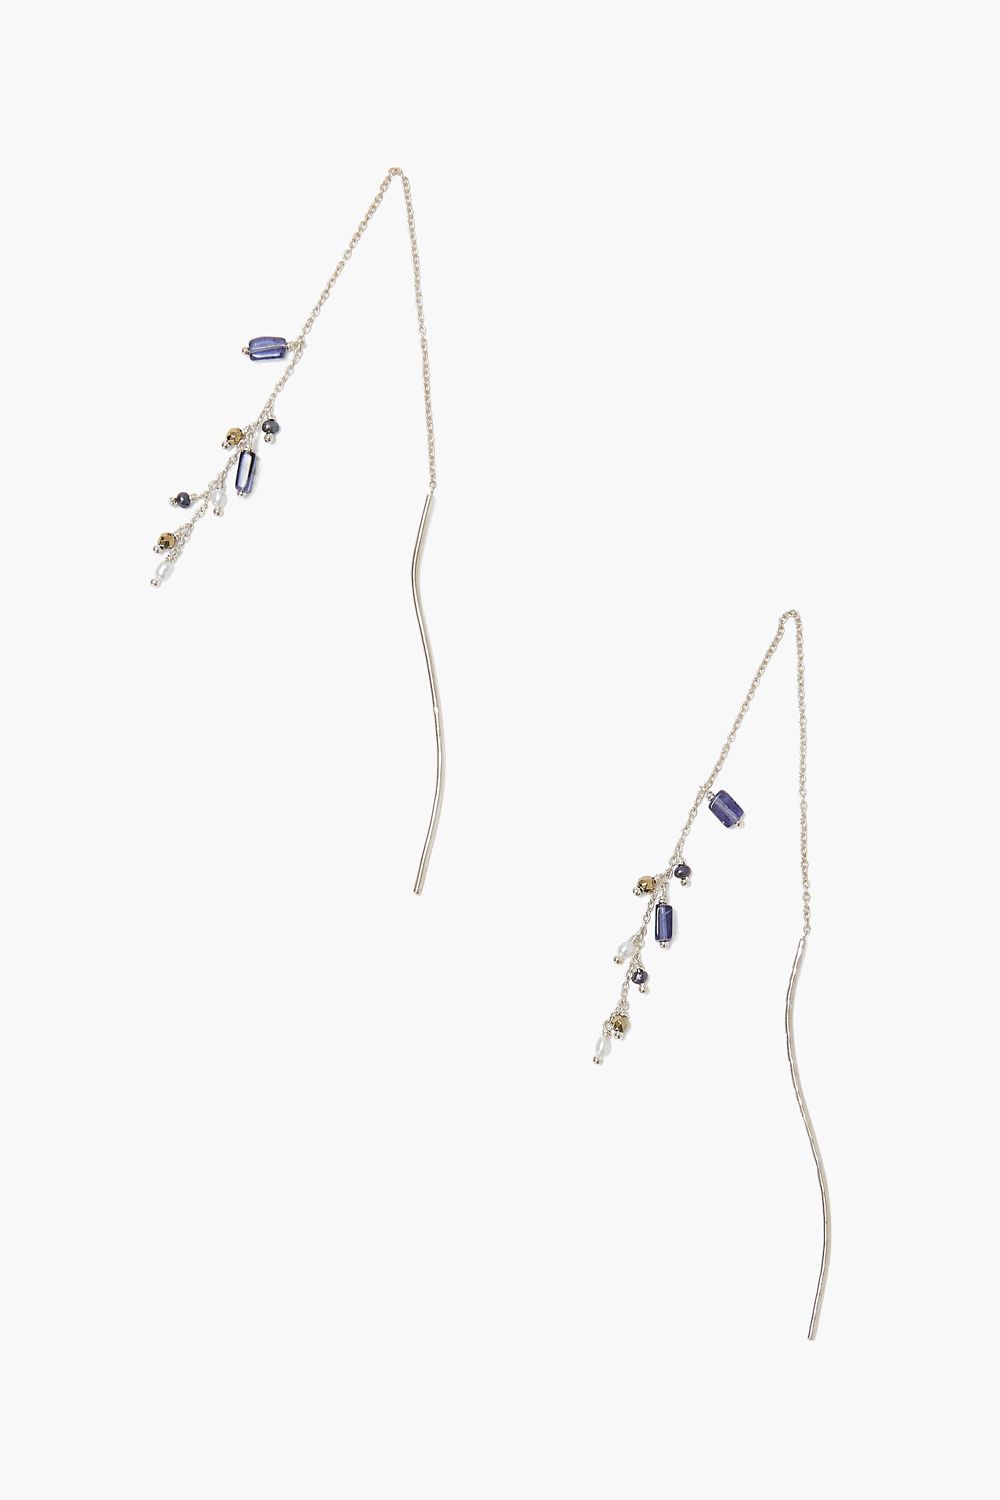 IOLITE MIX THREAD-THRU EARRINGS - Kingfisher Road - Online Boutique